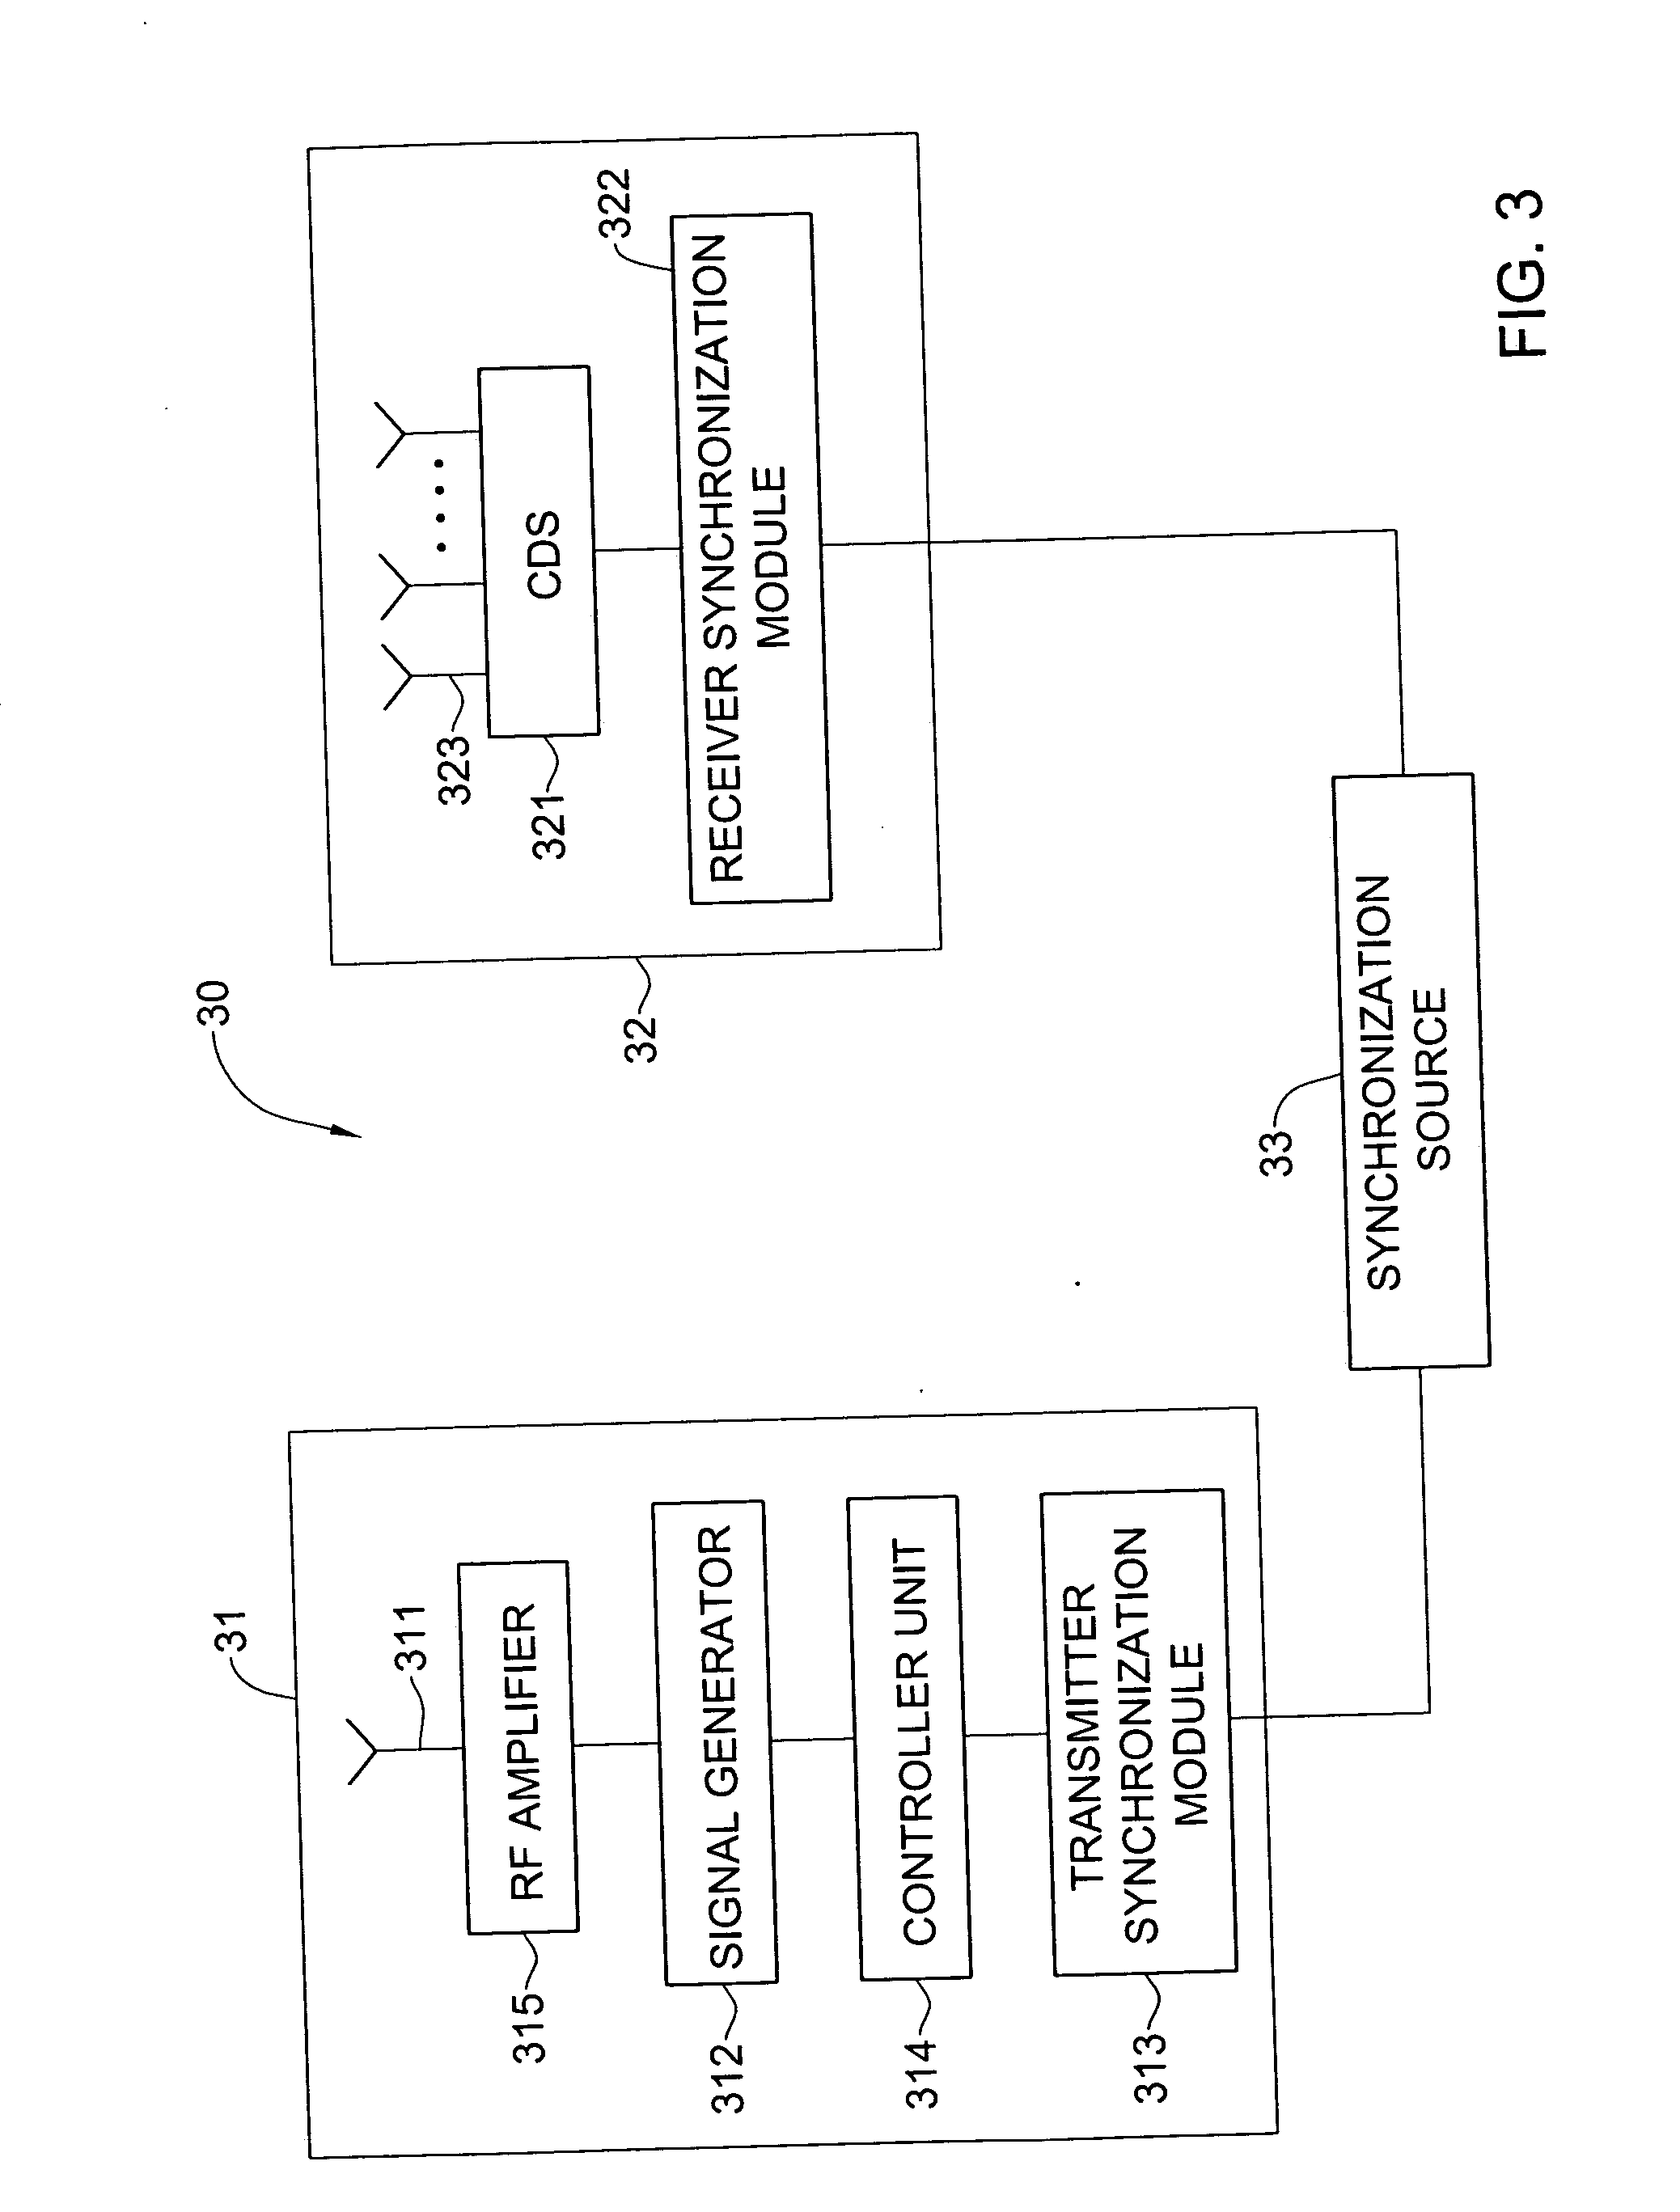 Method and system for calibration of a radio direction finder